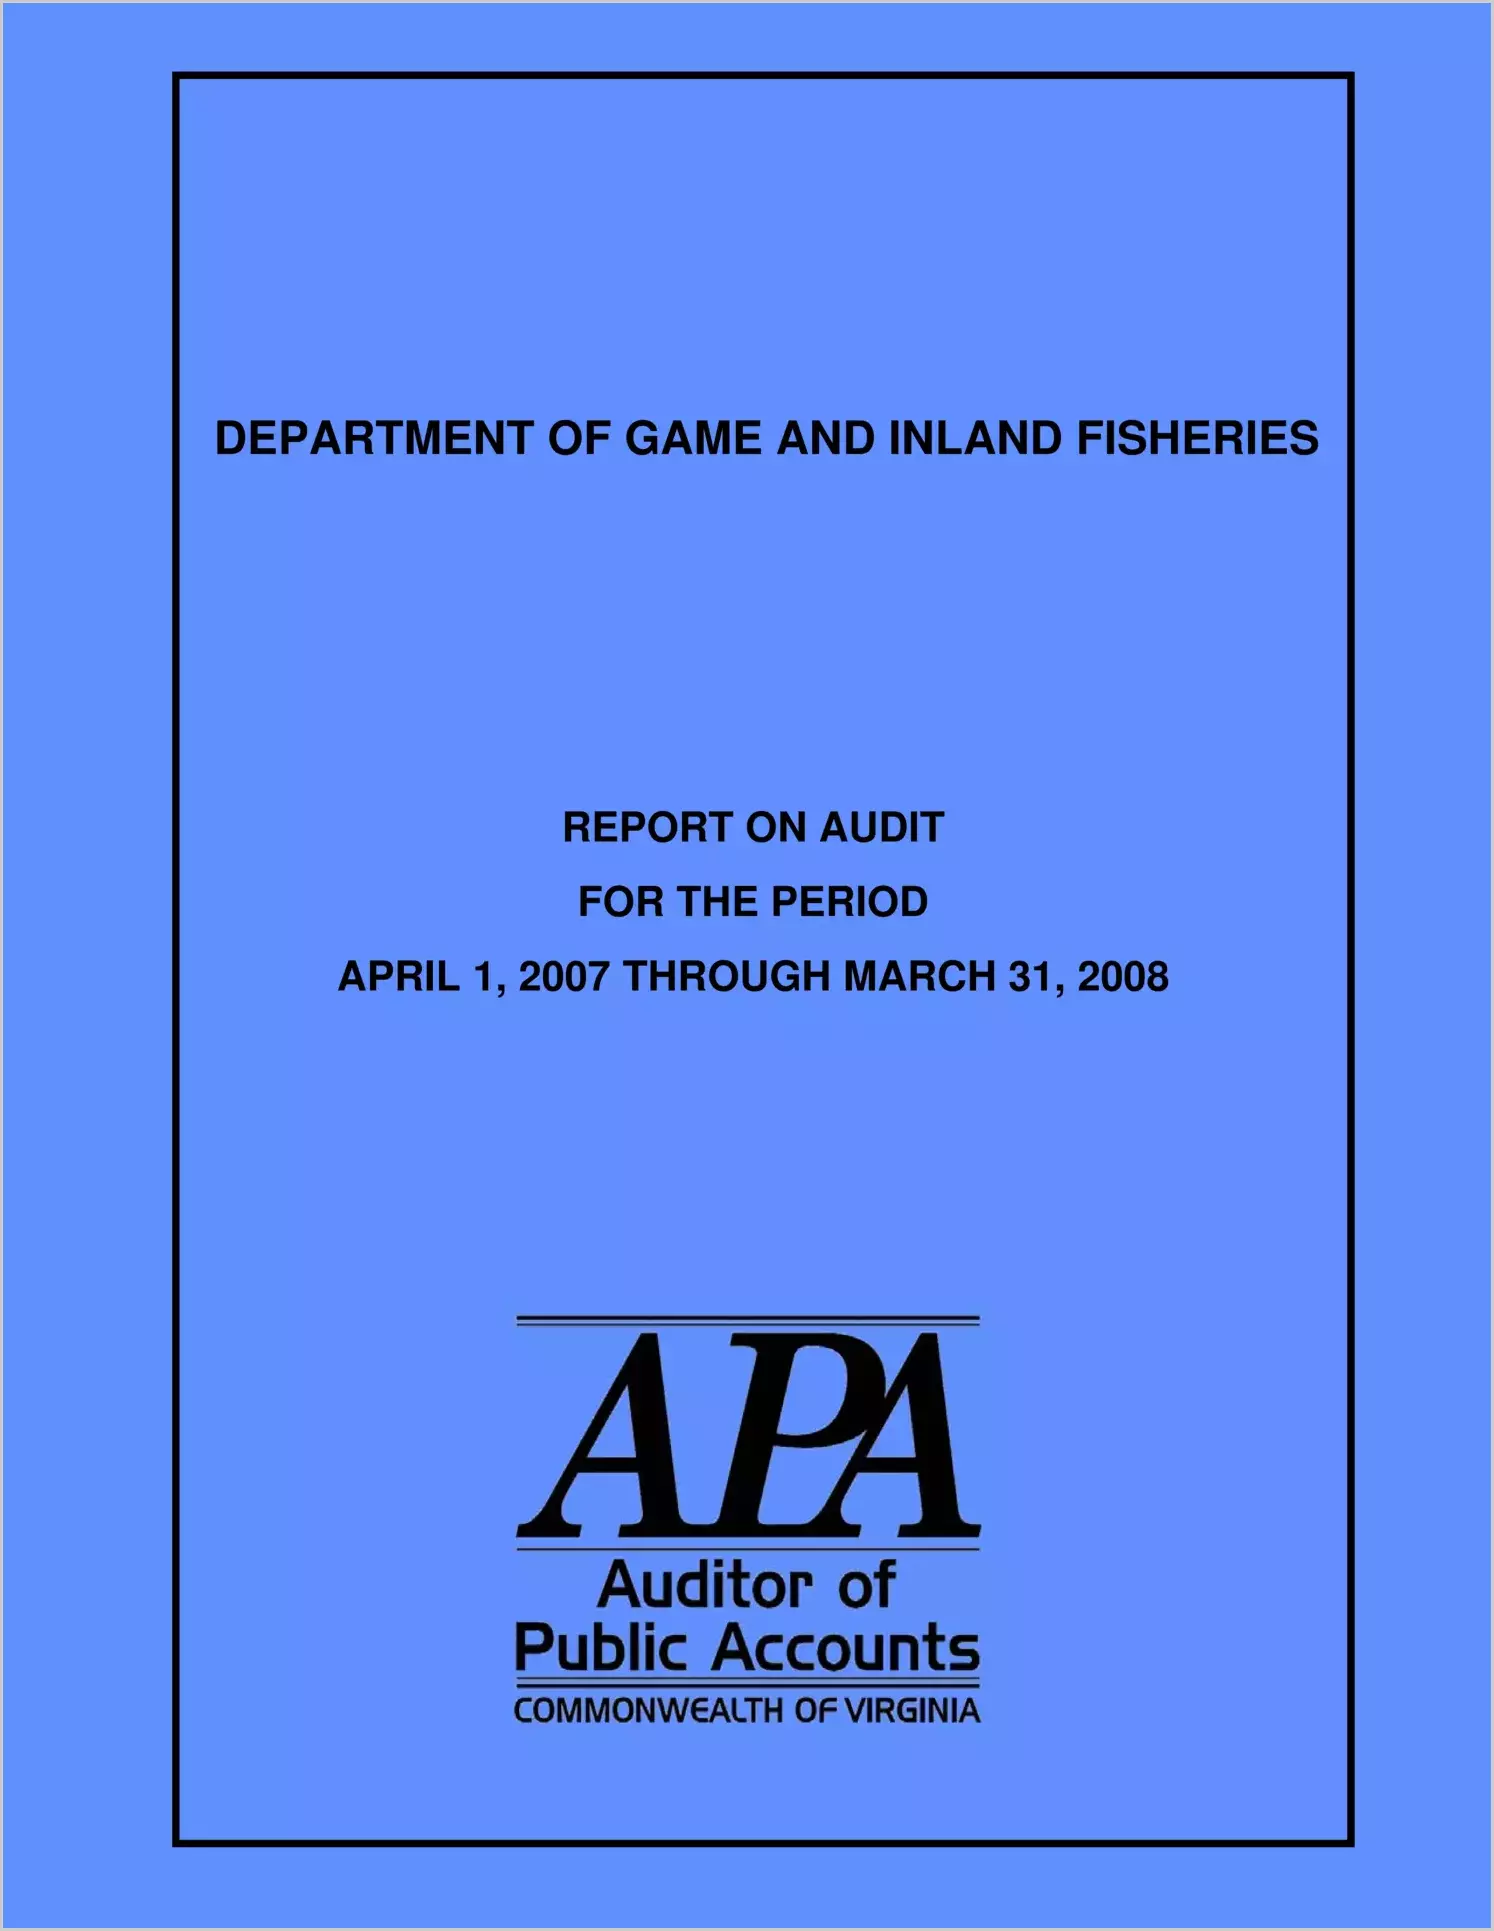 Department of Game and Inland Fisheries Report on Audit for the period April 1, 2007 through March 31, 2008